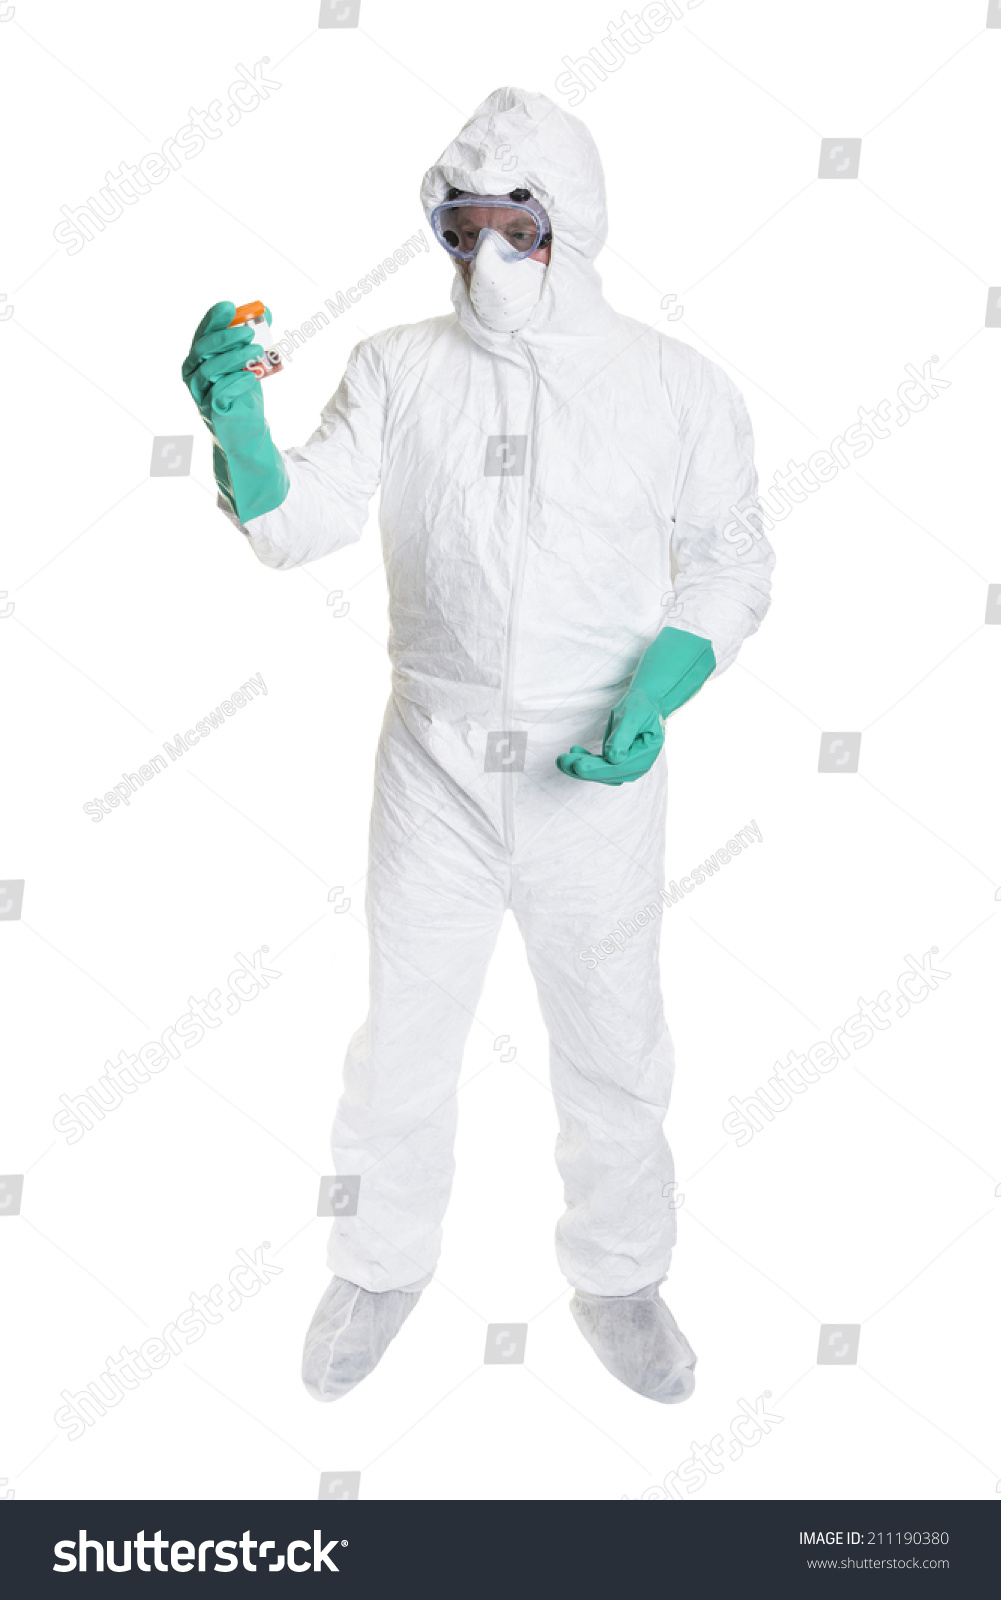 A Scientist In A Bio Hazard Suit Looking At A Sample Of Body Fluid ...